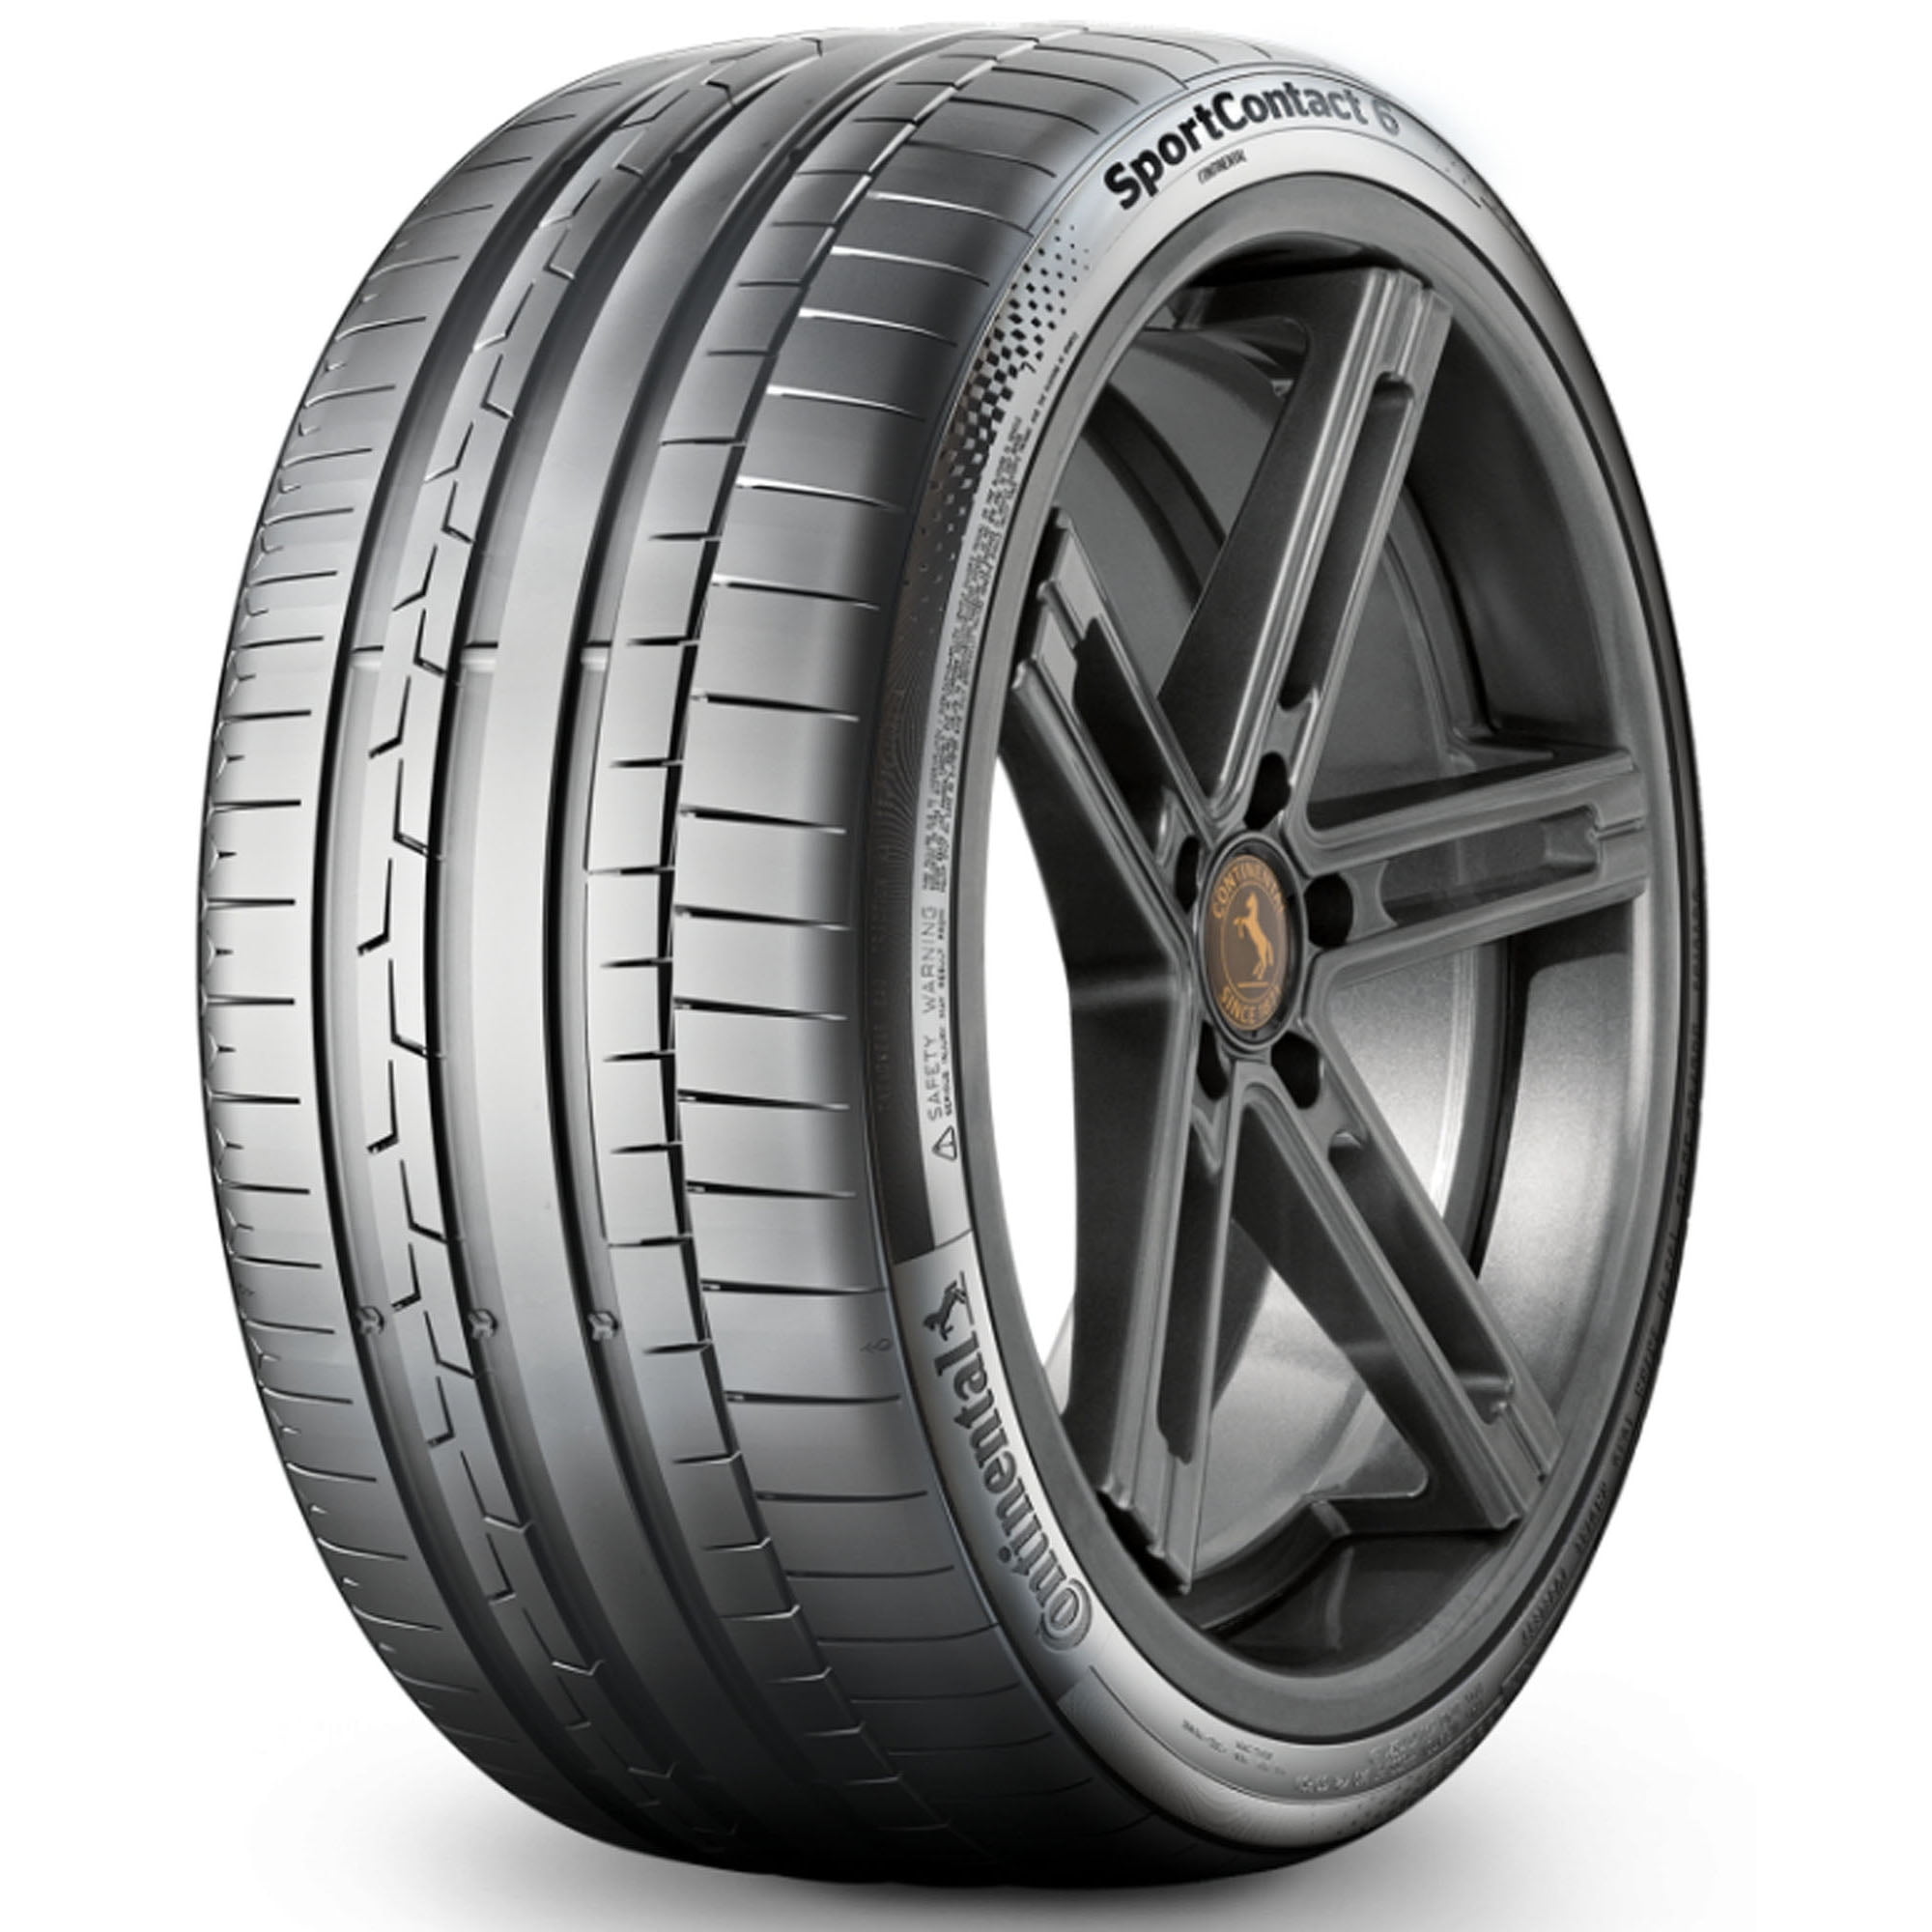 93Y 6 Tire ContiSportContact XL 245/35R19 Summer Passenger Continental